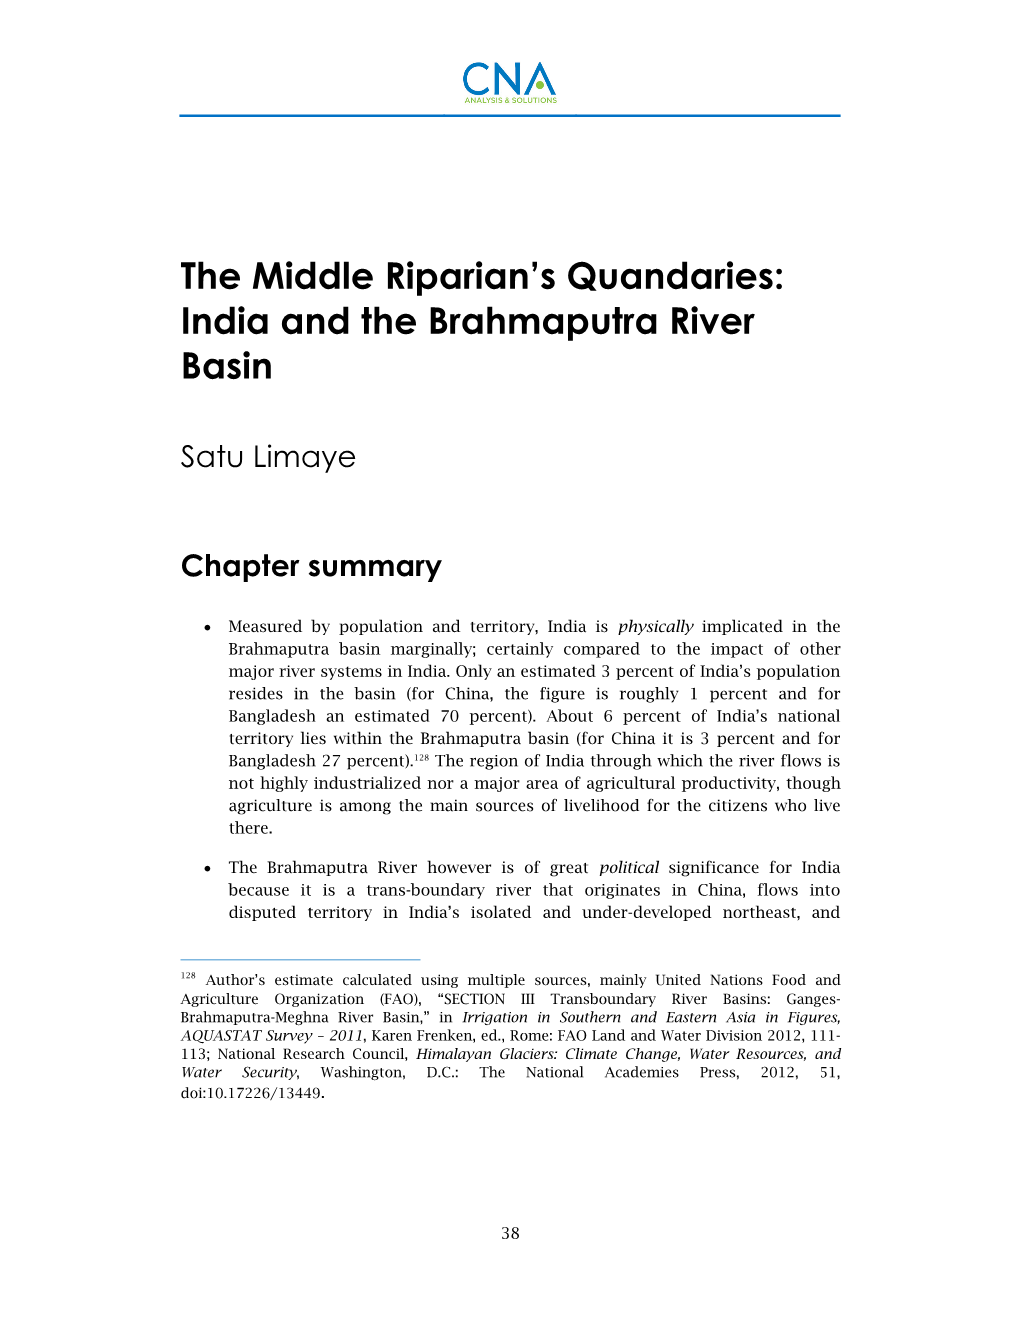 The Middle Riparian's Quandaries: India and the Brahmaputra River